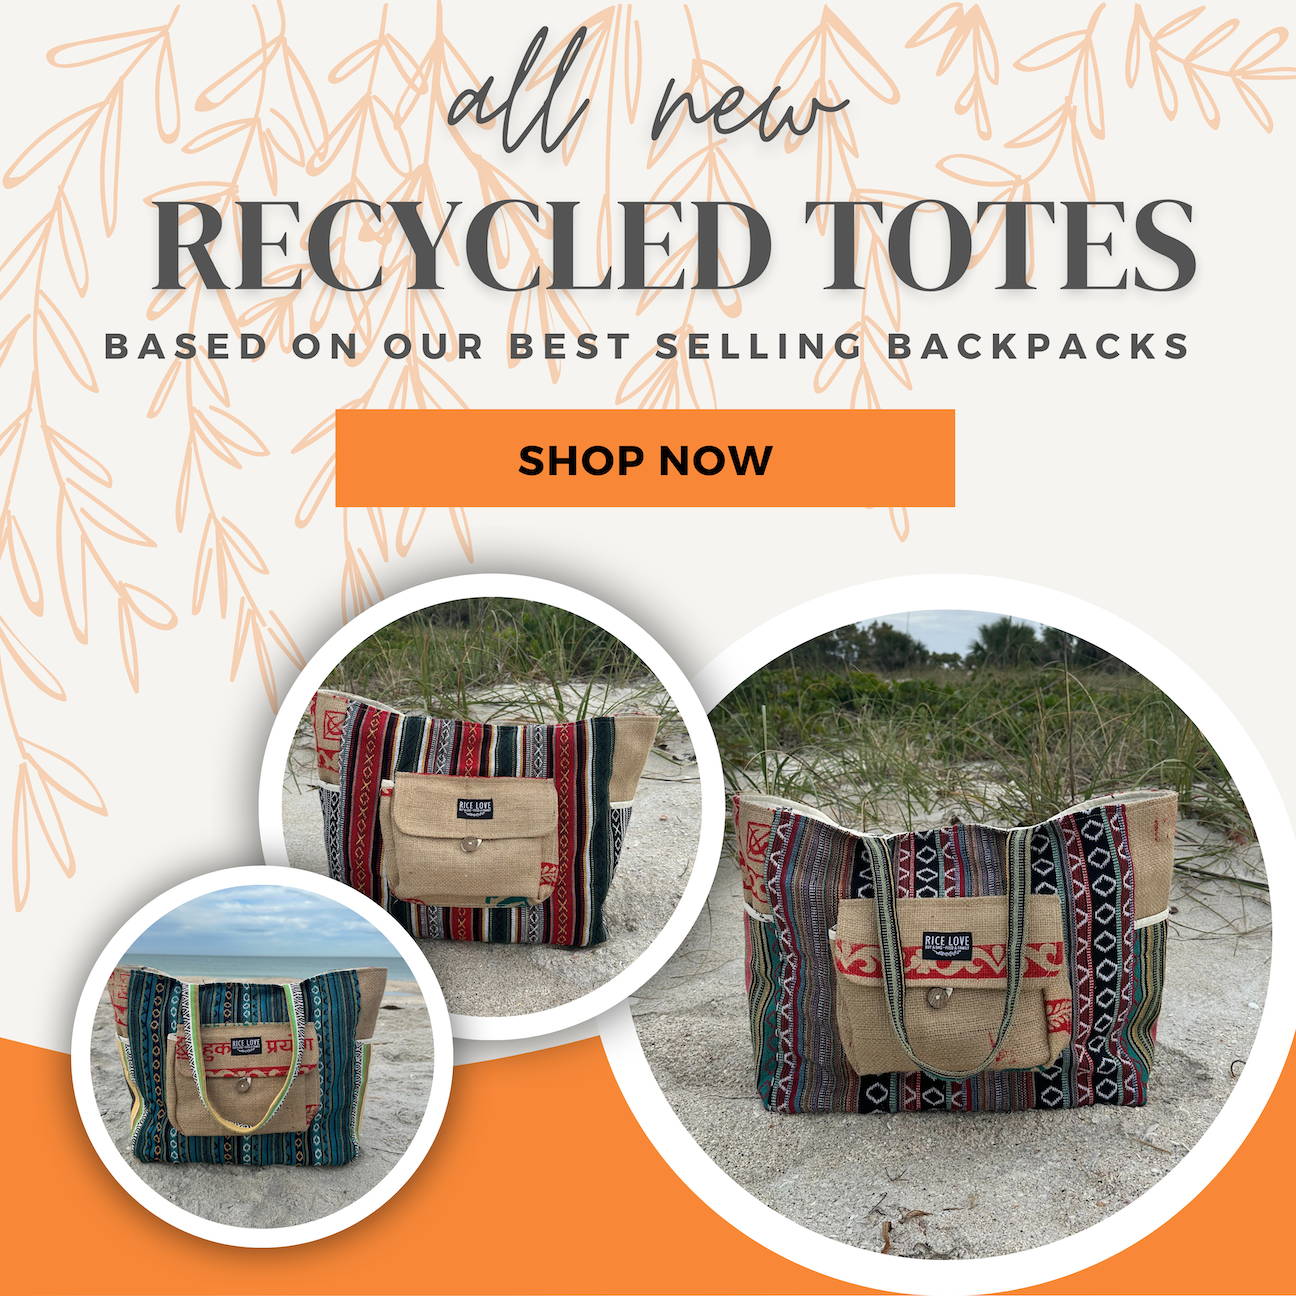 rice love recycled tote biodegradable recycled feed a family 